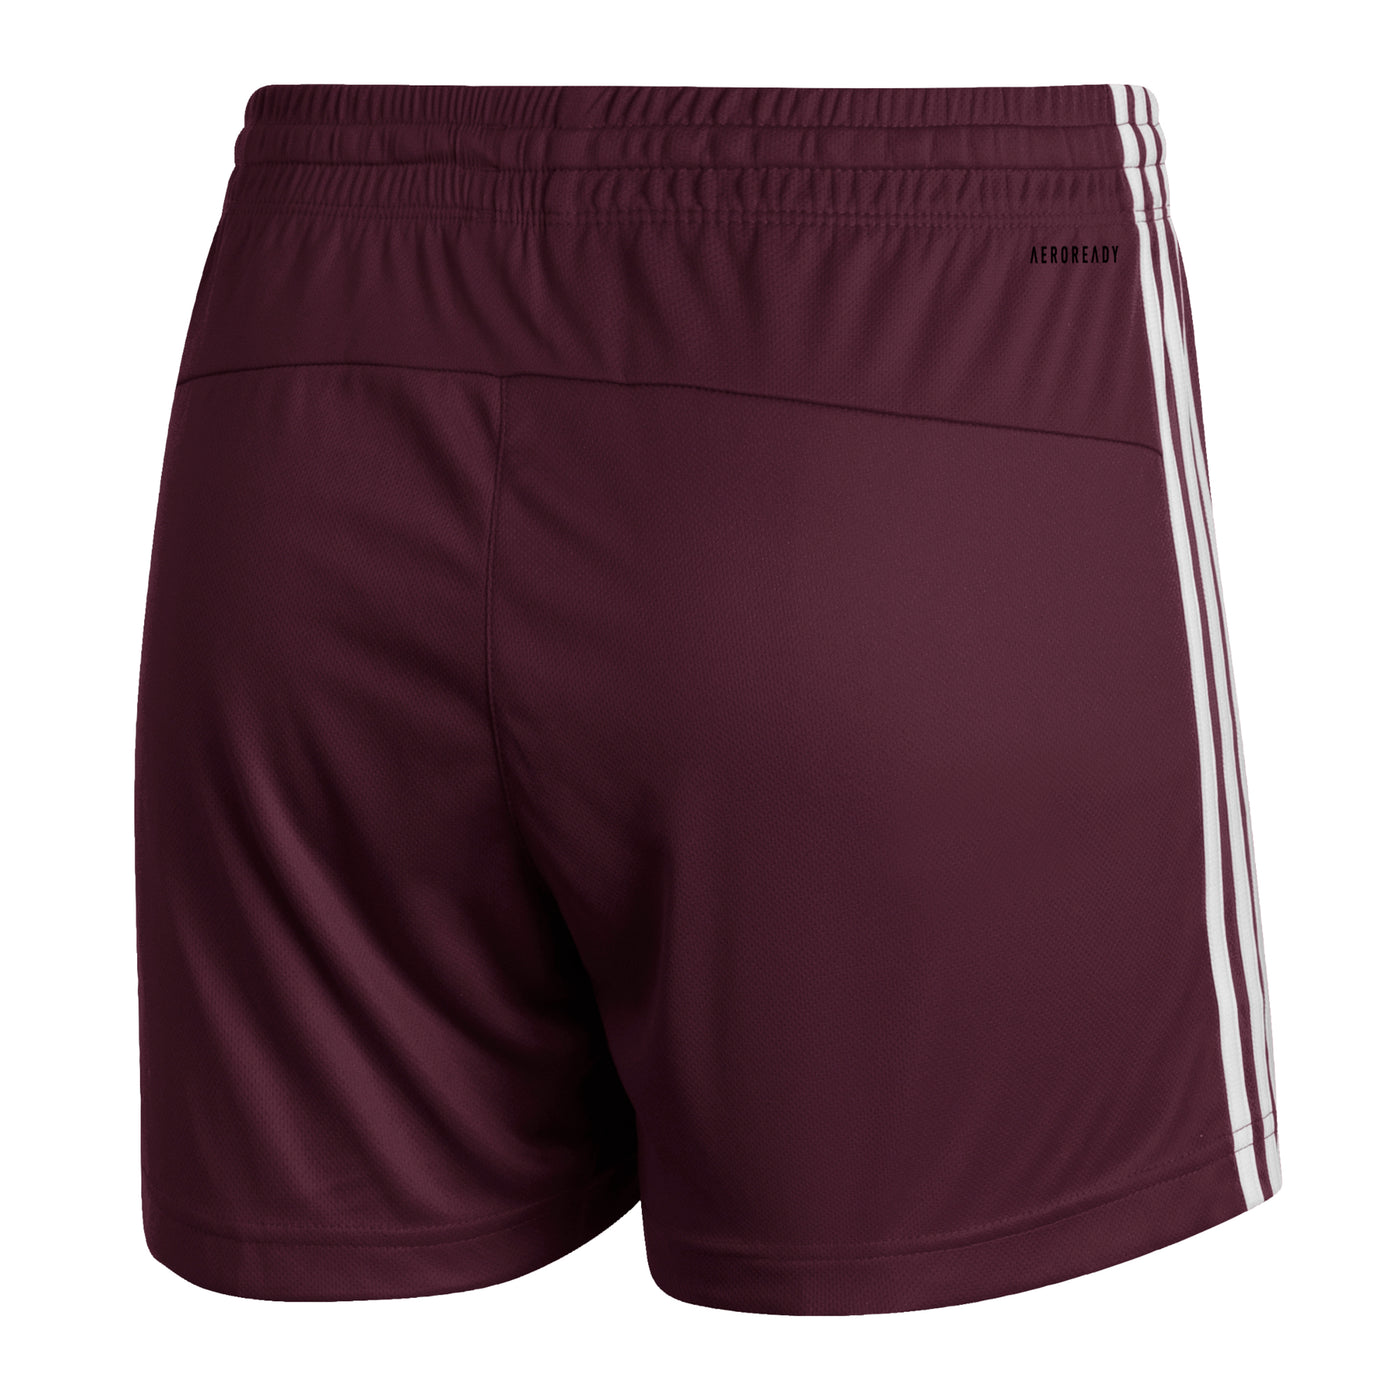 Back view of ASU maroon women's shorts with 3 white stripes down the side